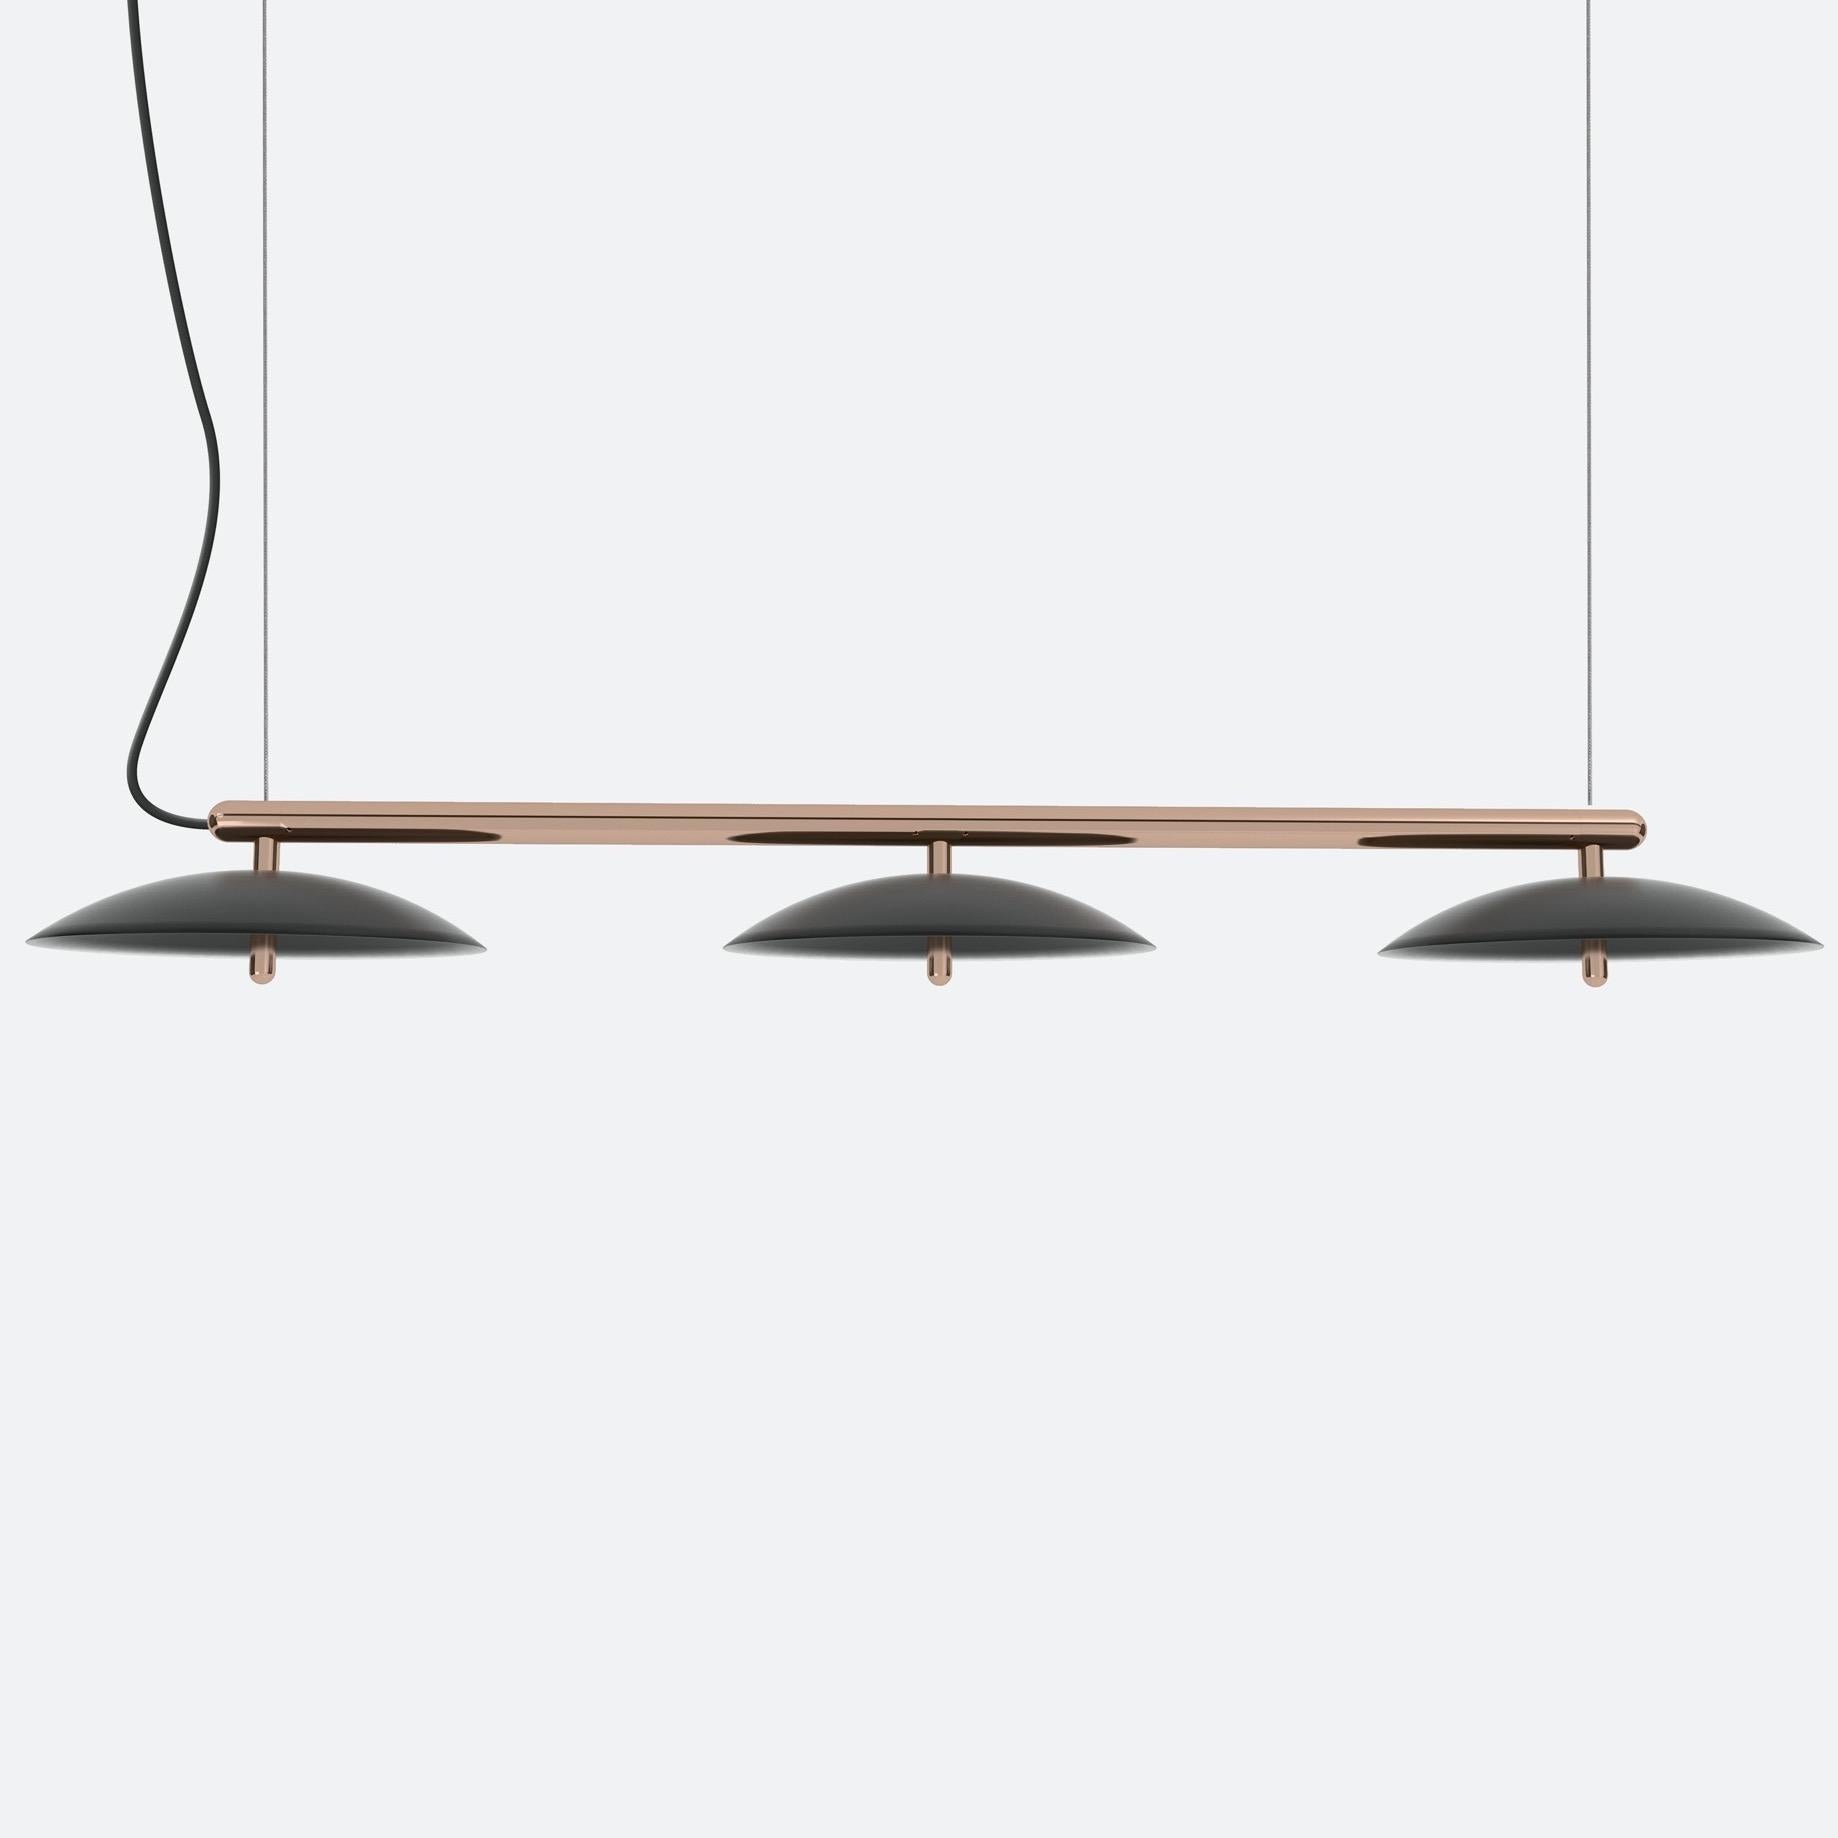 Price is for a signal linear pendant with black shade and brass accents. This piece is customizable so we can also make the finishes per order to your spec. 

Lamping: G8 LED Bulbs (included)
Canopy: Black, 5in Diameter, .25in height
6x G8 LED bulbs